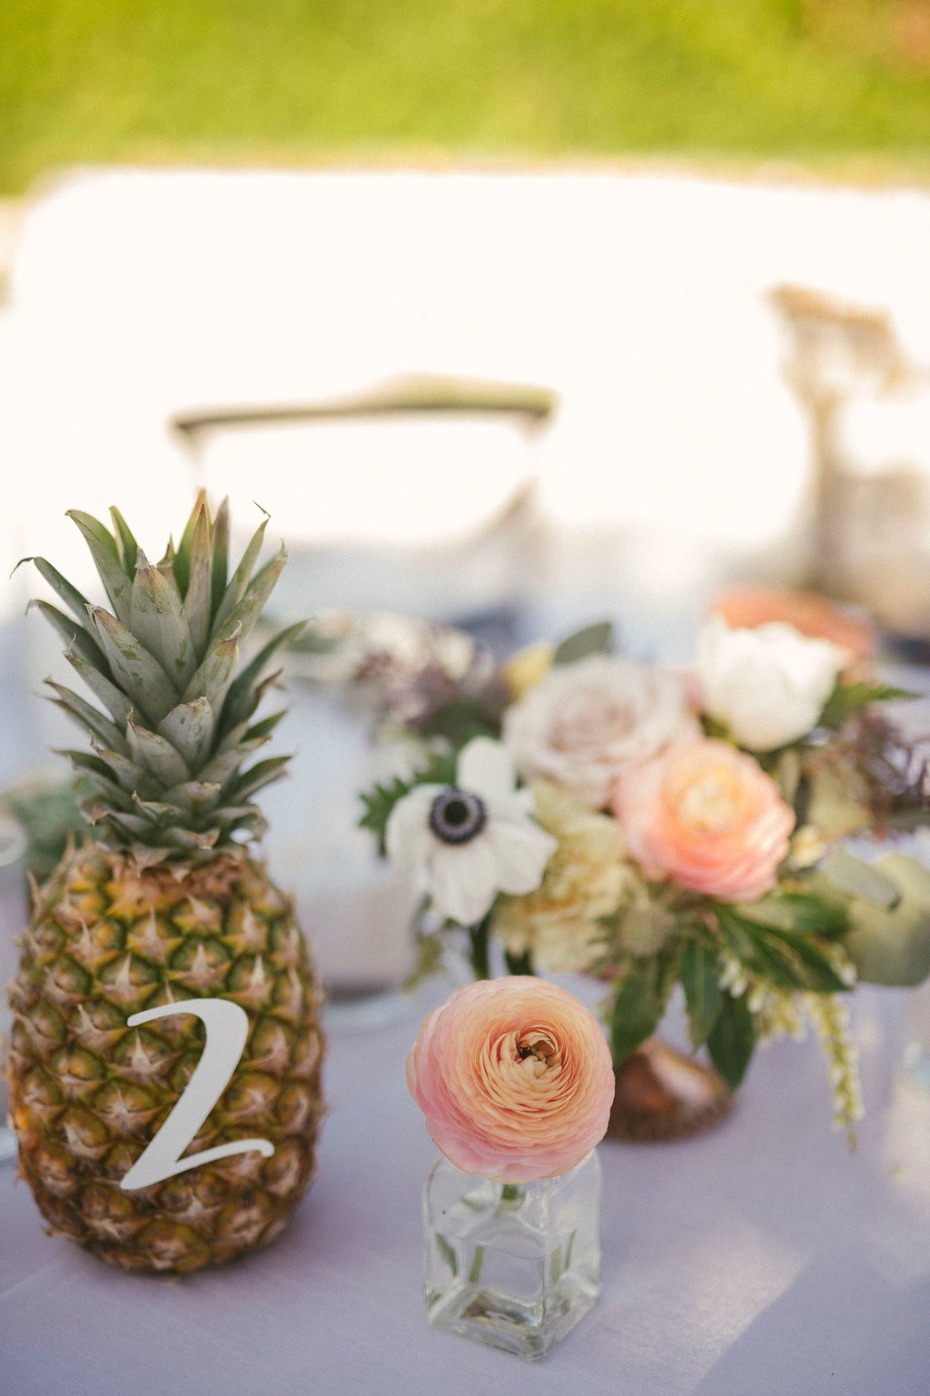 Use a pineapple for table numbers